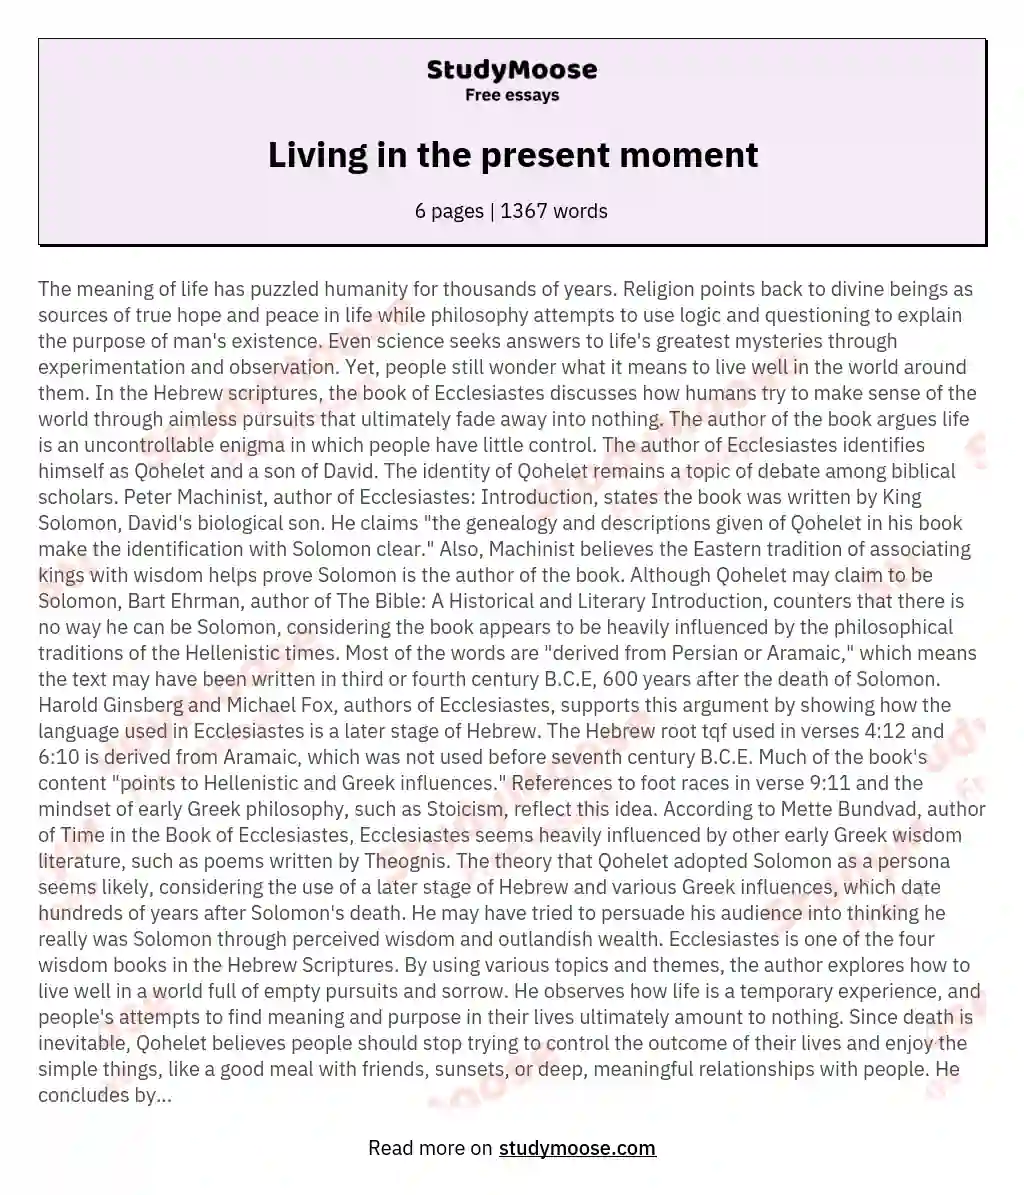 Living in the present moment essay